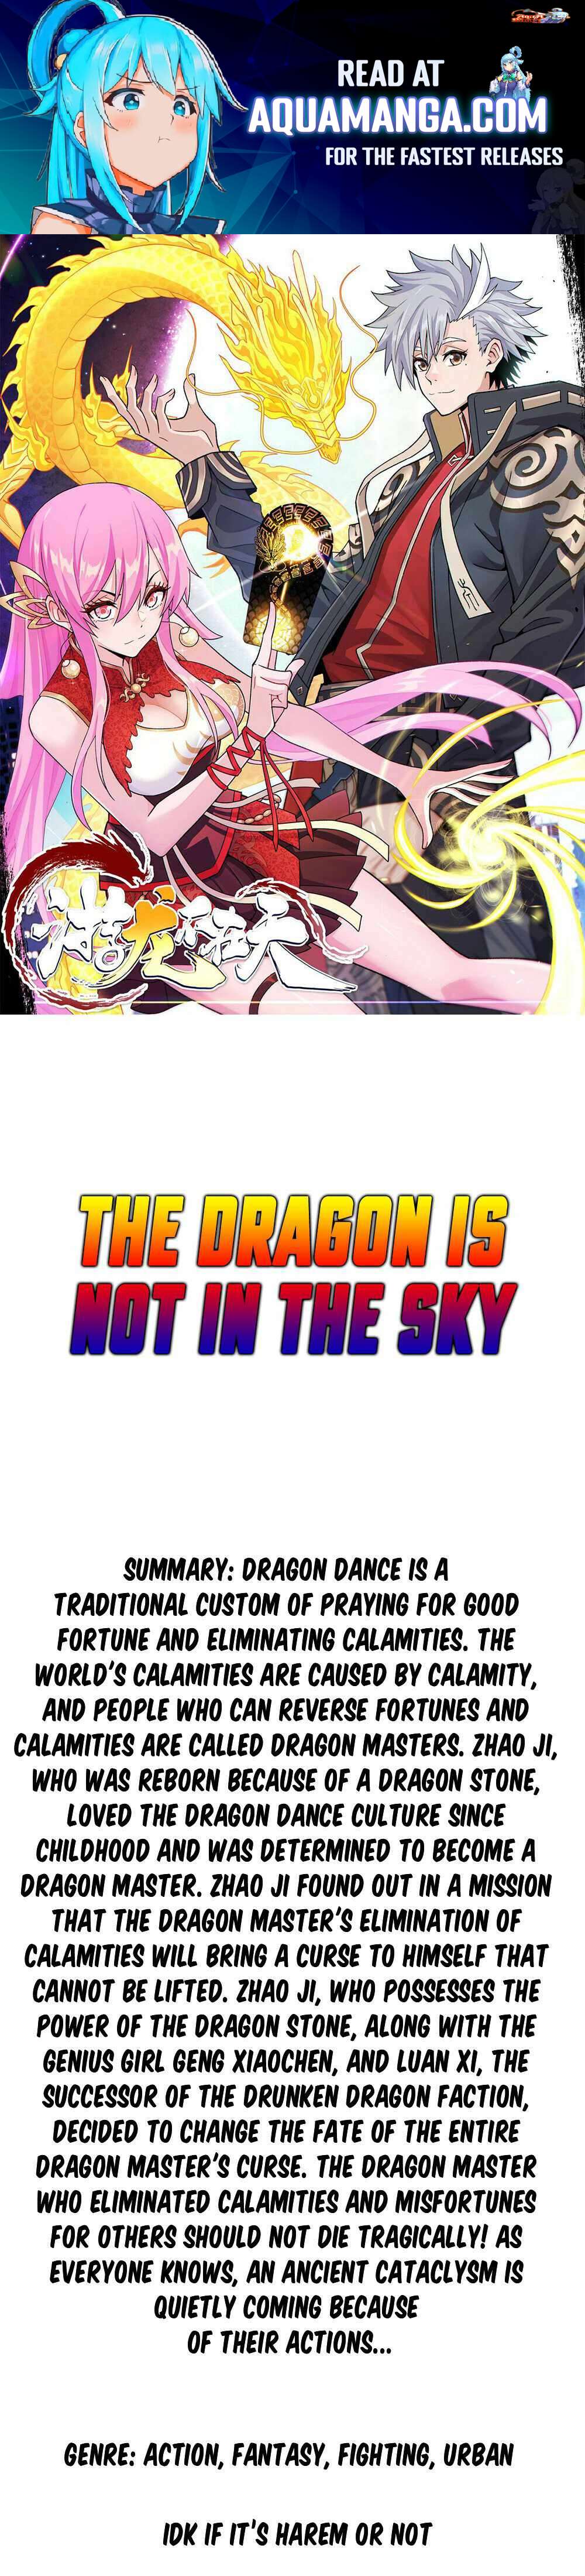 The Dragon Is Not In The Sky - Page 2